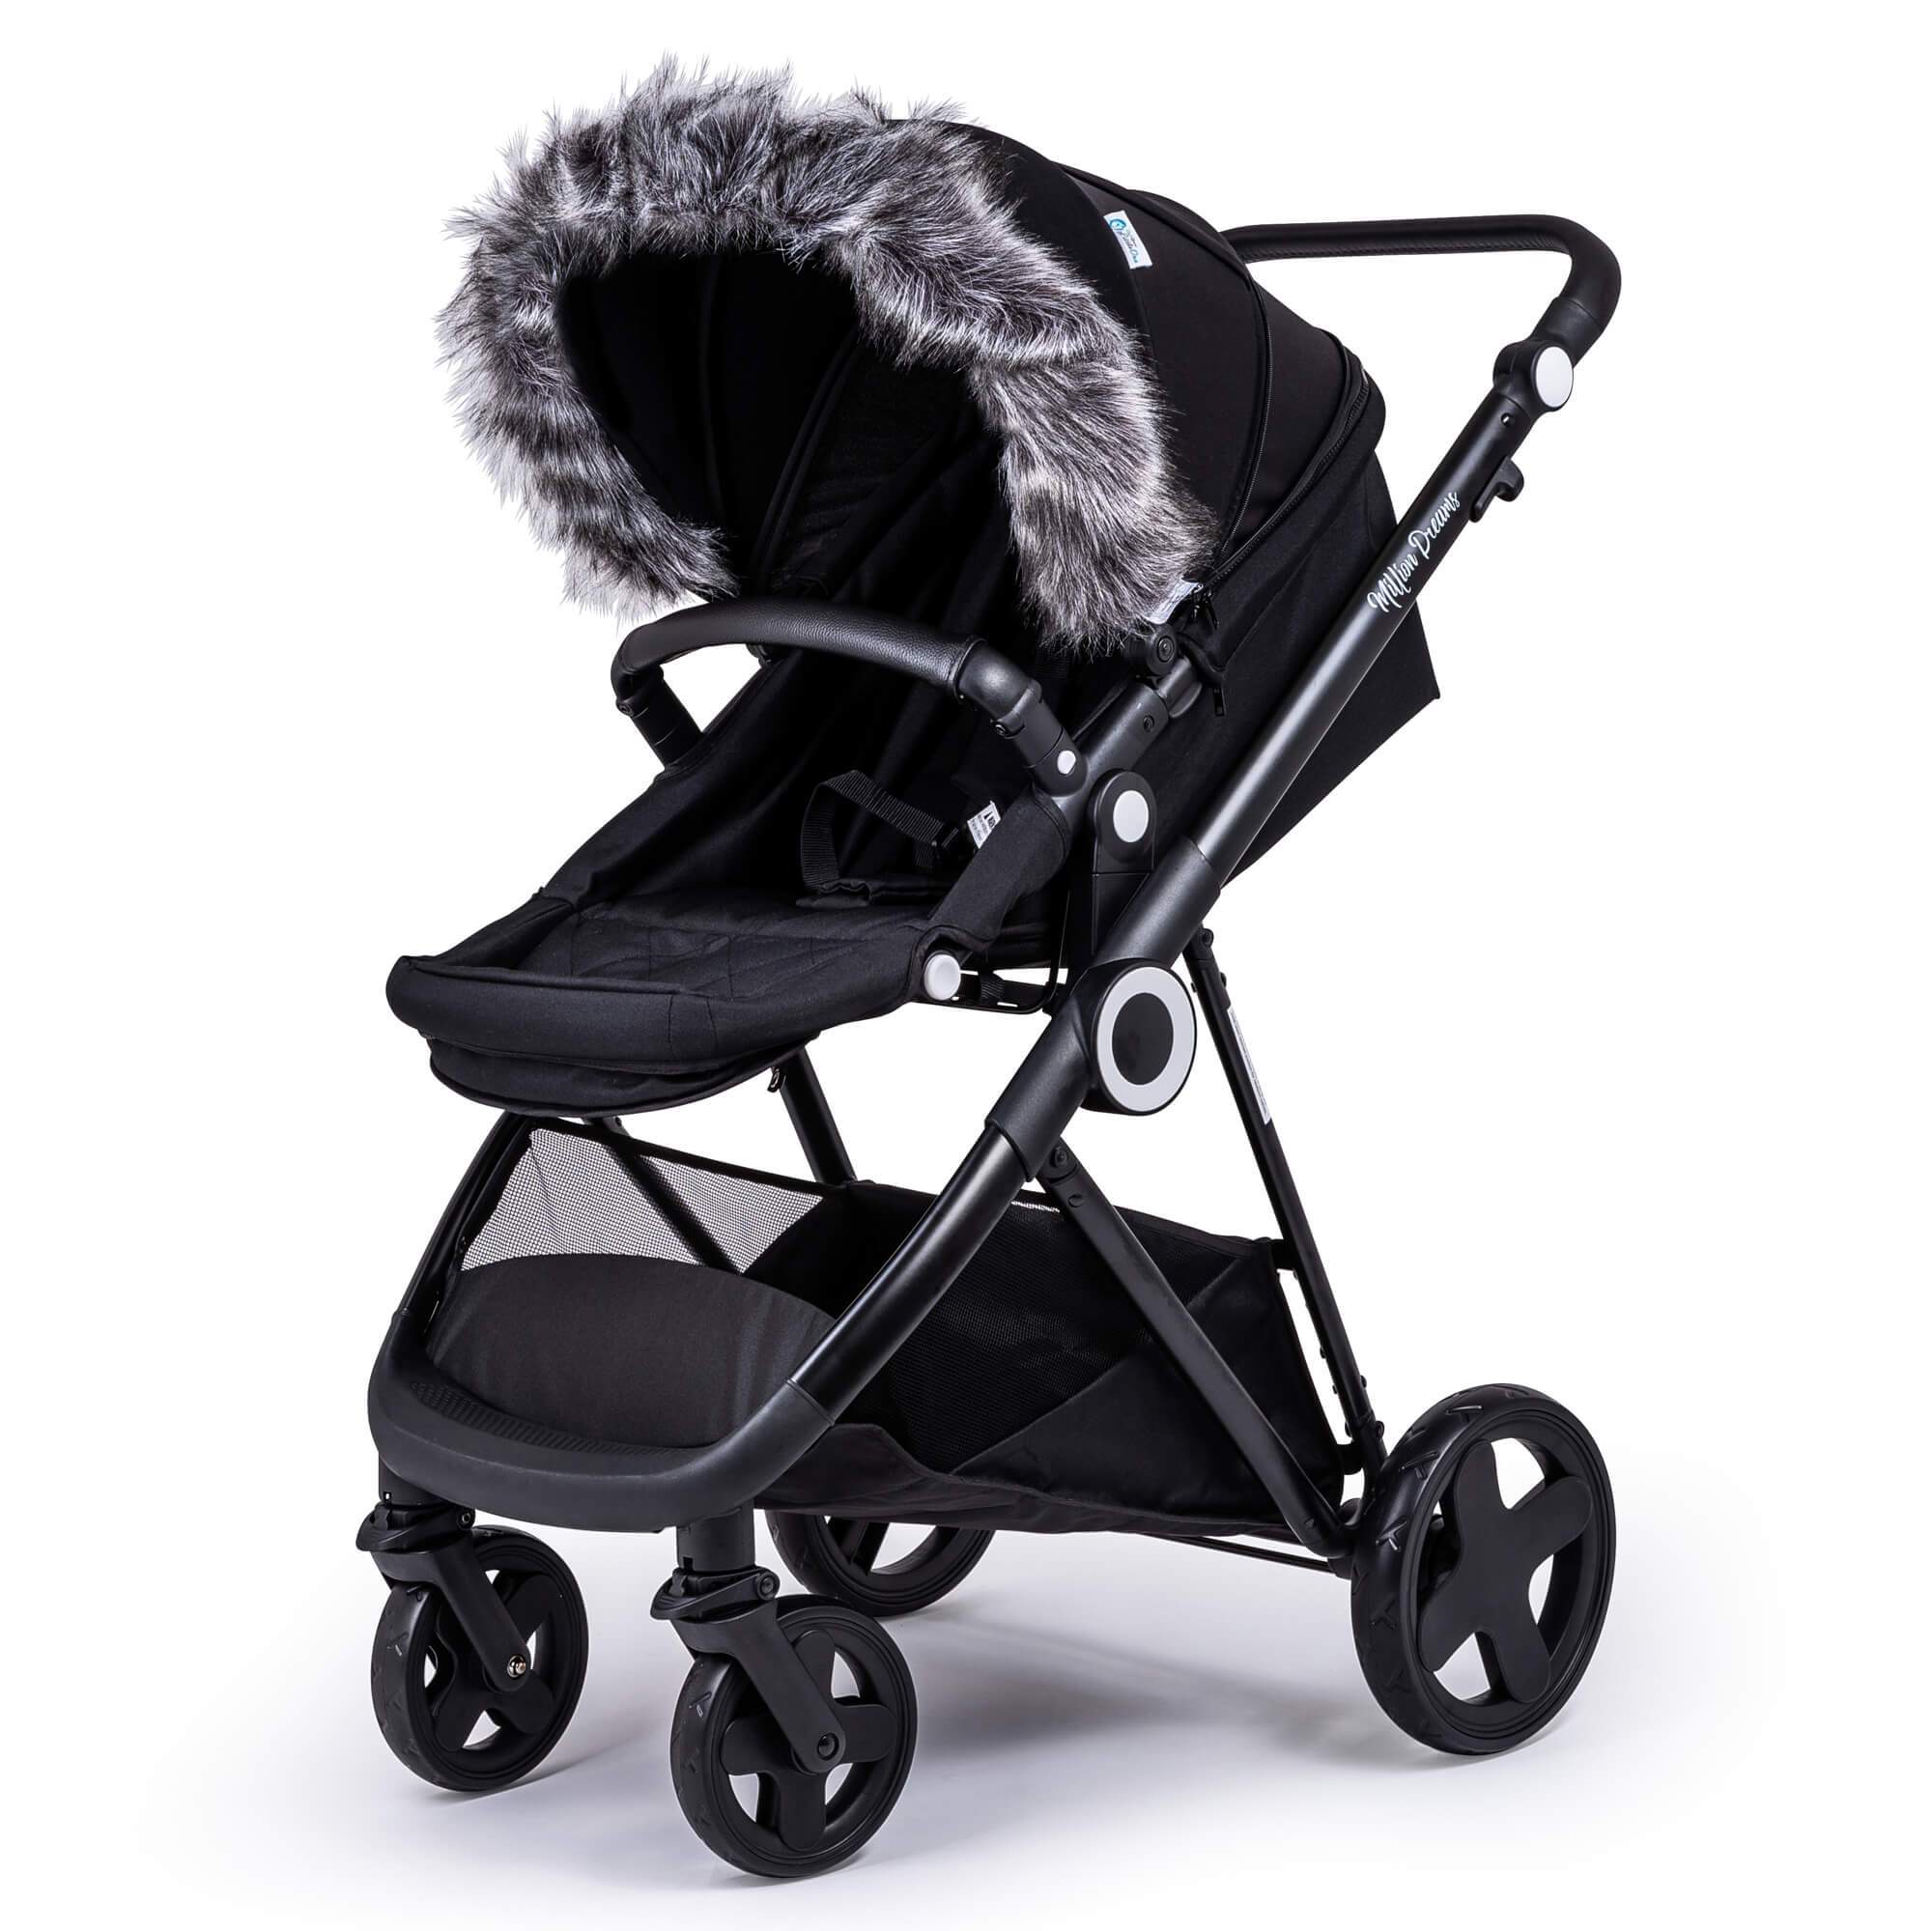 Pram Fur Hood Trim Attachment for Pushchair Compatible with Greentom - Dark Grey / Fits All Models | For Your Little One